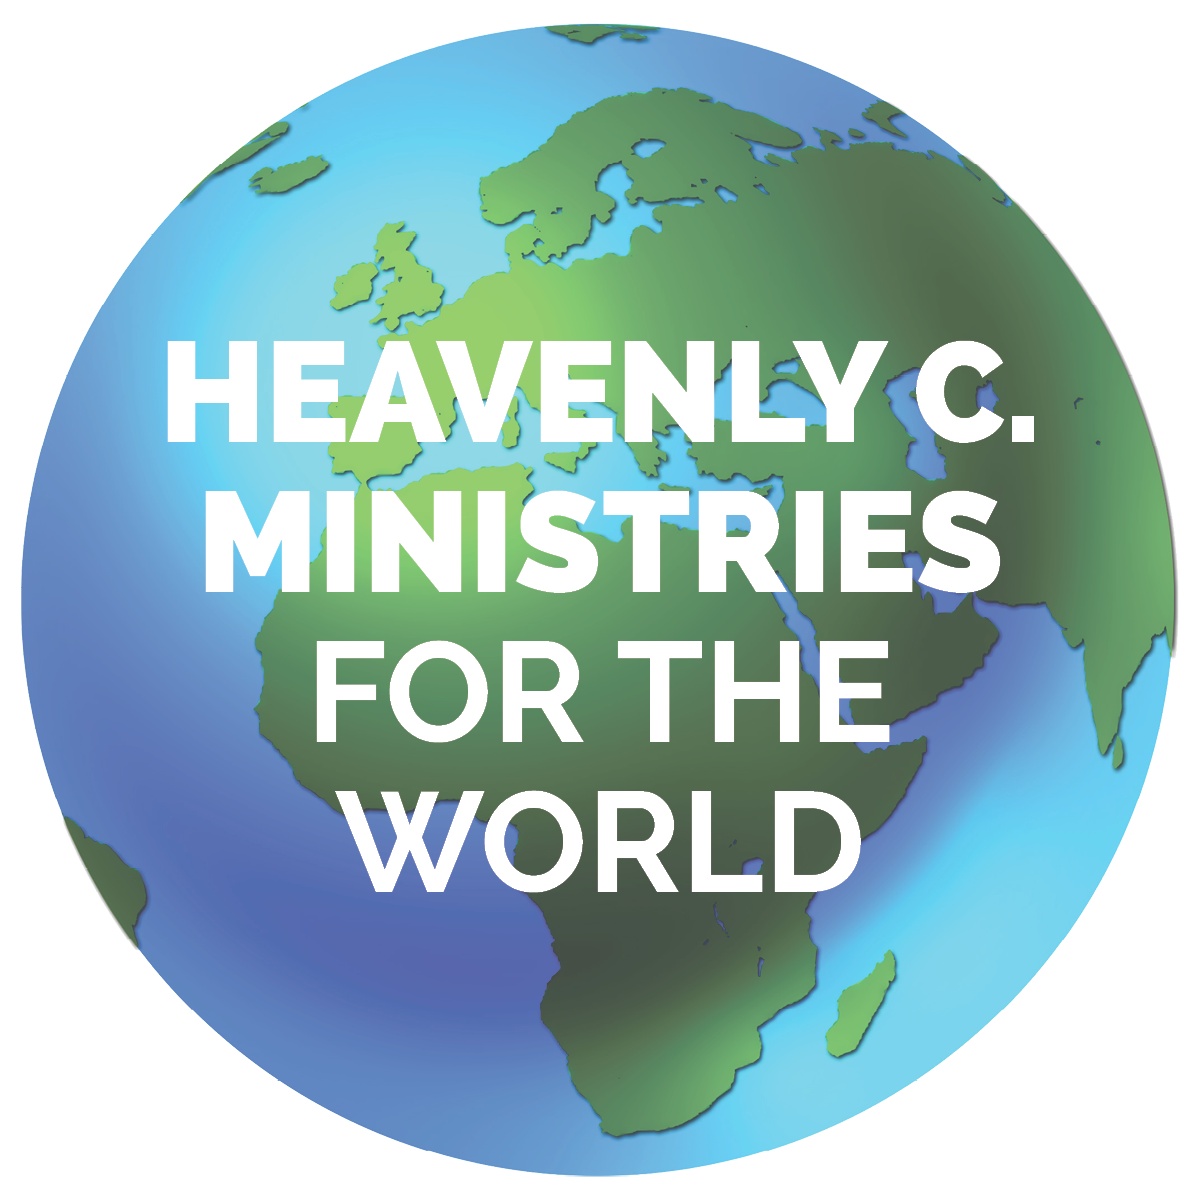 Heavenly C. Ministries for the World